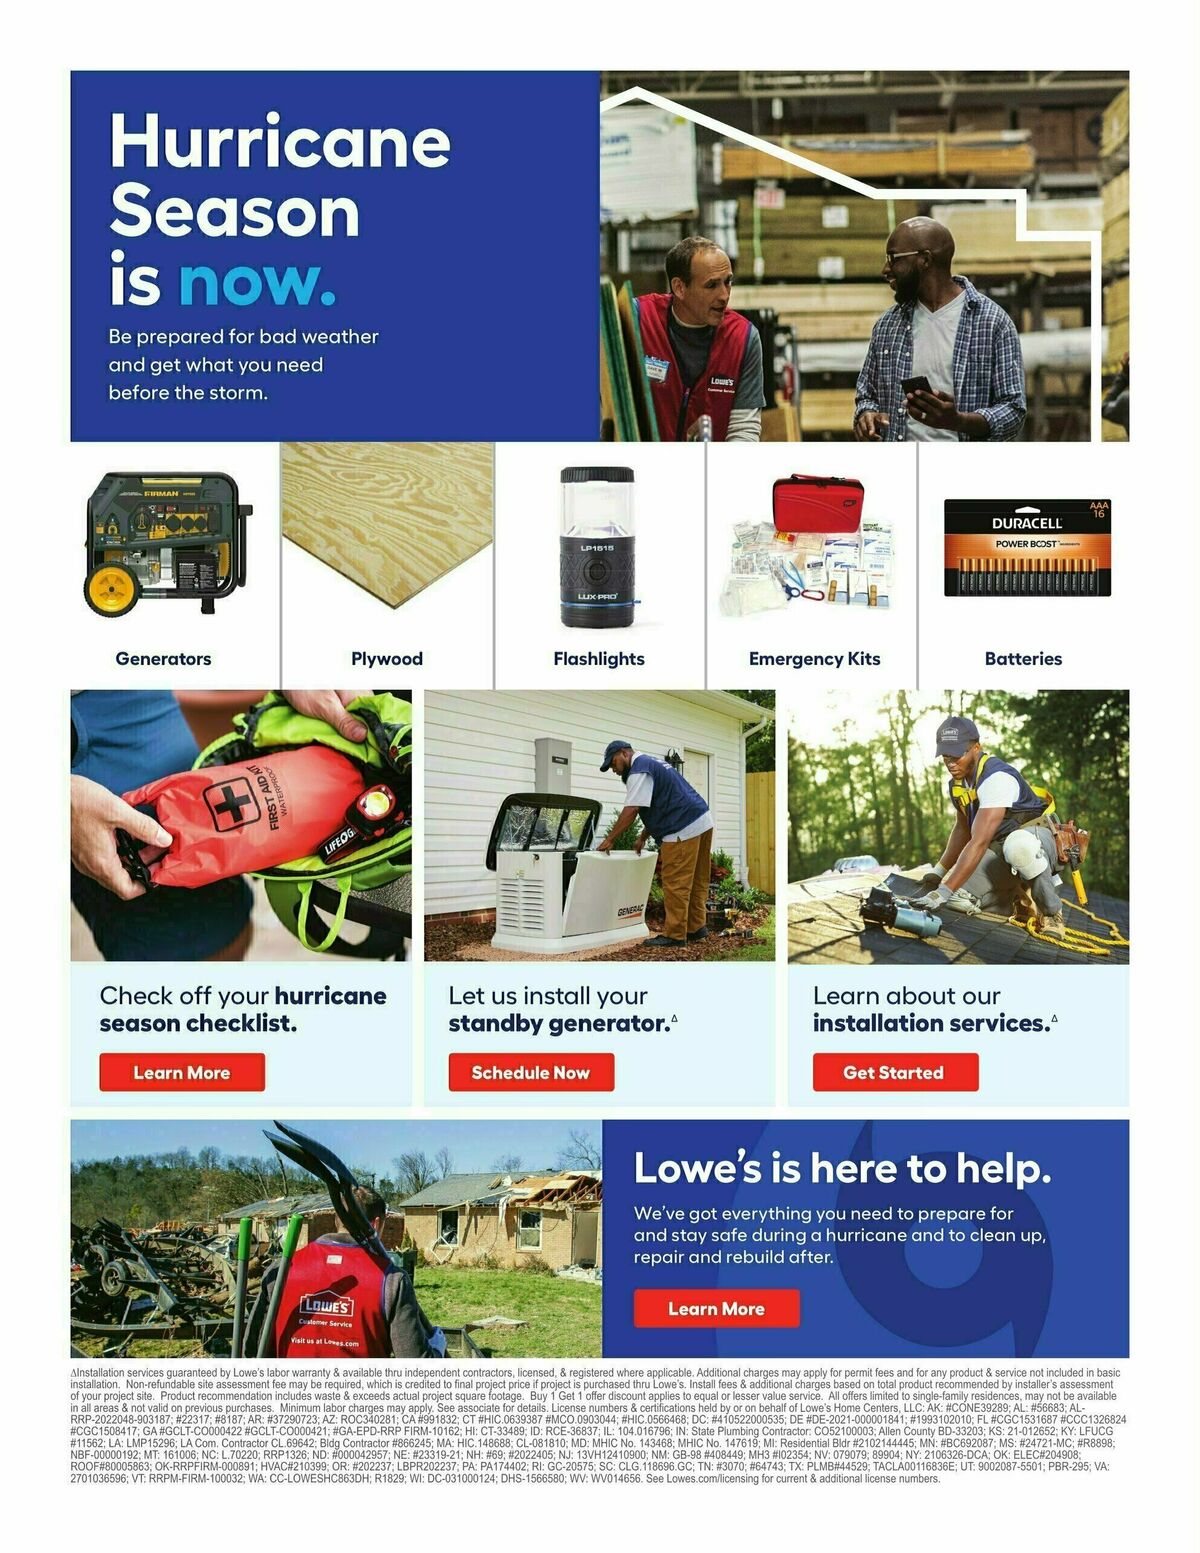 Lowe's Weekly Ad from July 13